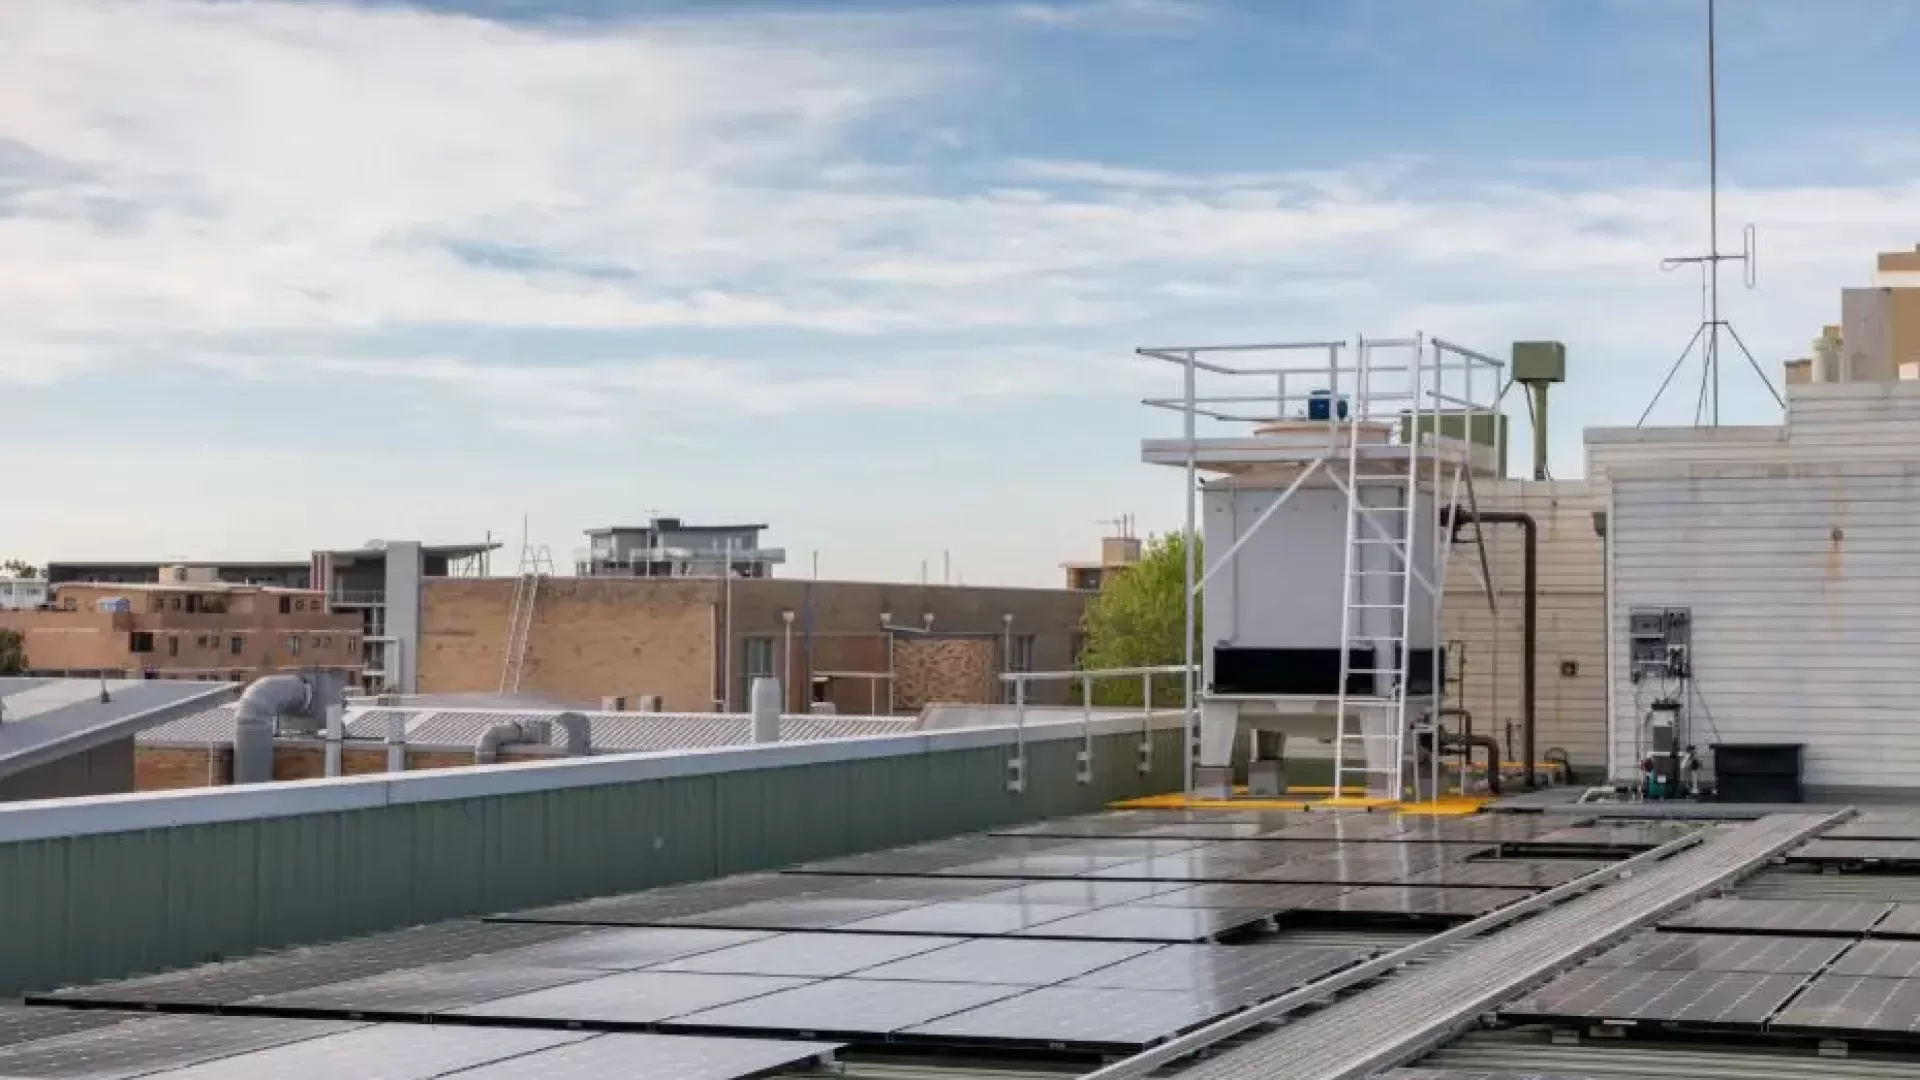 HVAC cooling tower on the roof of a commercial building, surrounded by solar panels.